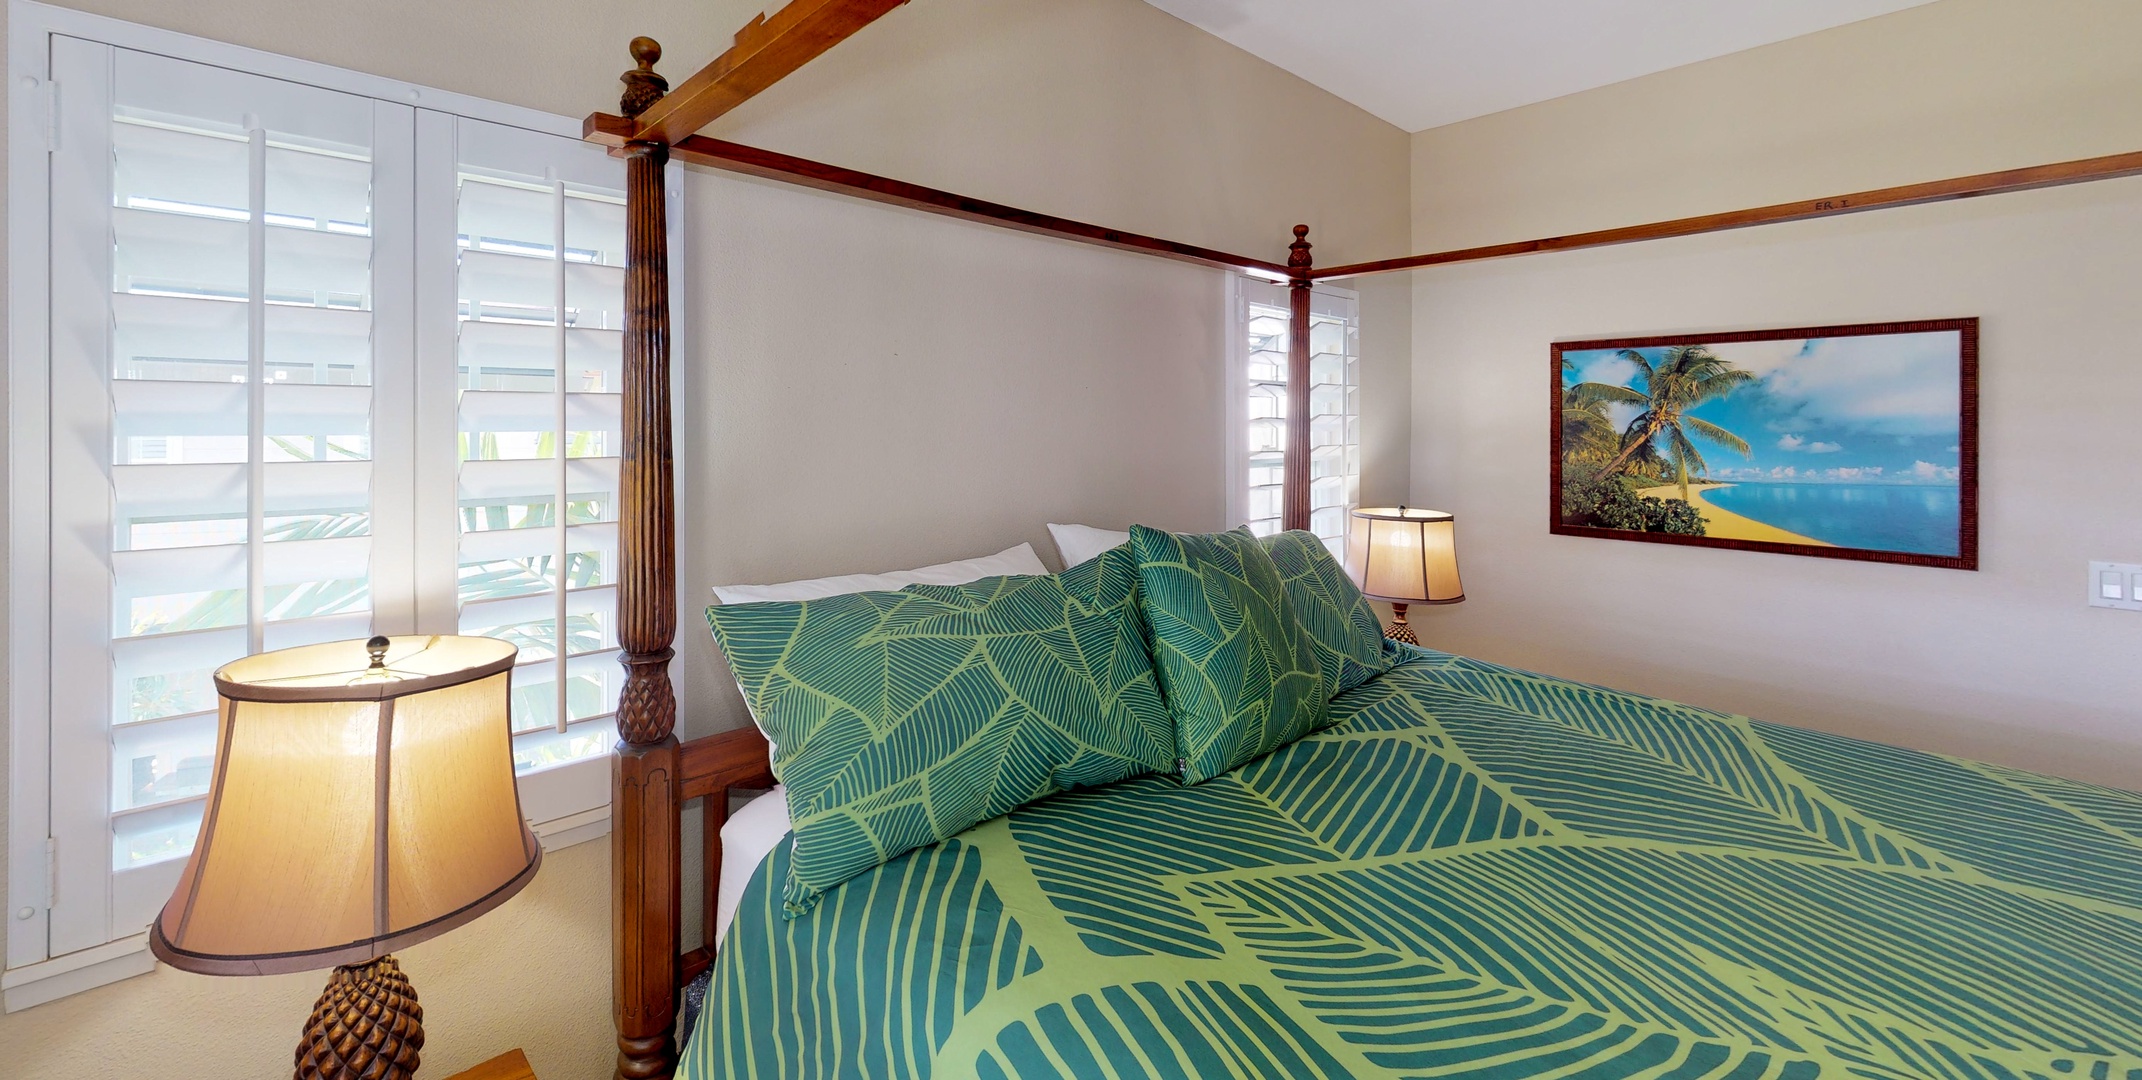 Kapolei Vacation Rentals, Coconut Plantation 1194-3 - The primary guest bedroom with comfortable surroundings and natural lighting.